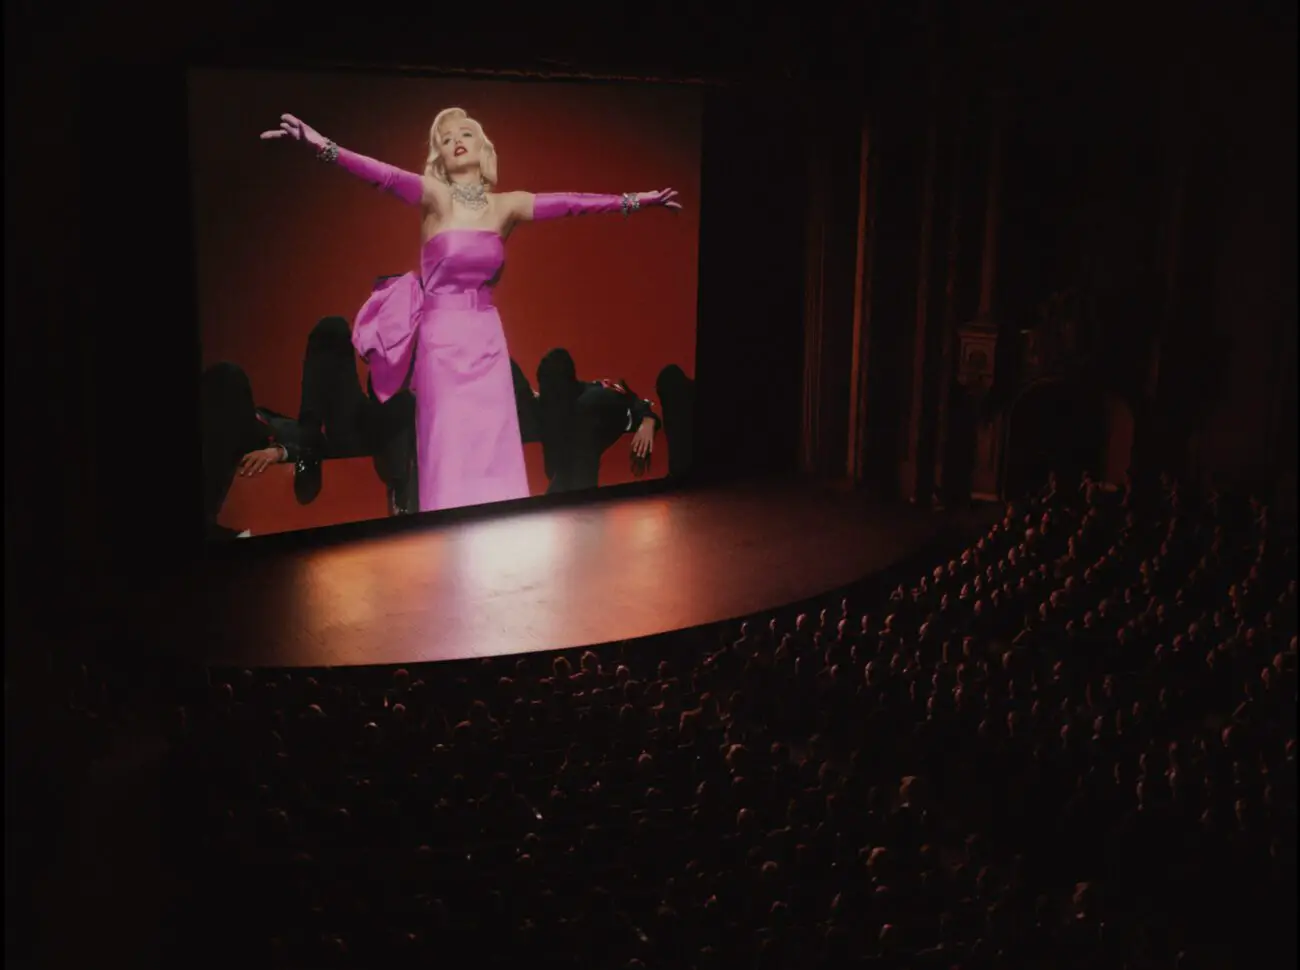 A scene from "Gentlemen Prefer Blondes" on screen at a movie theatre